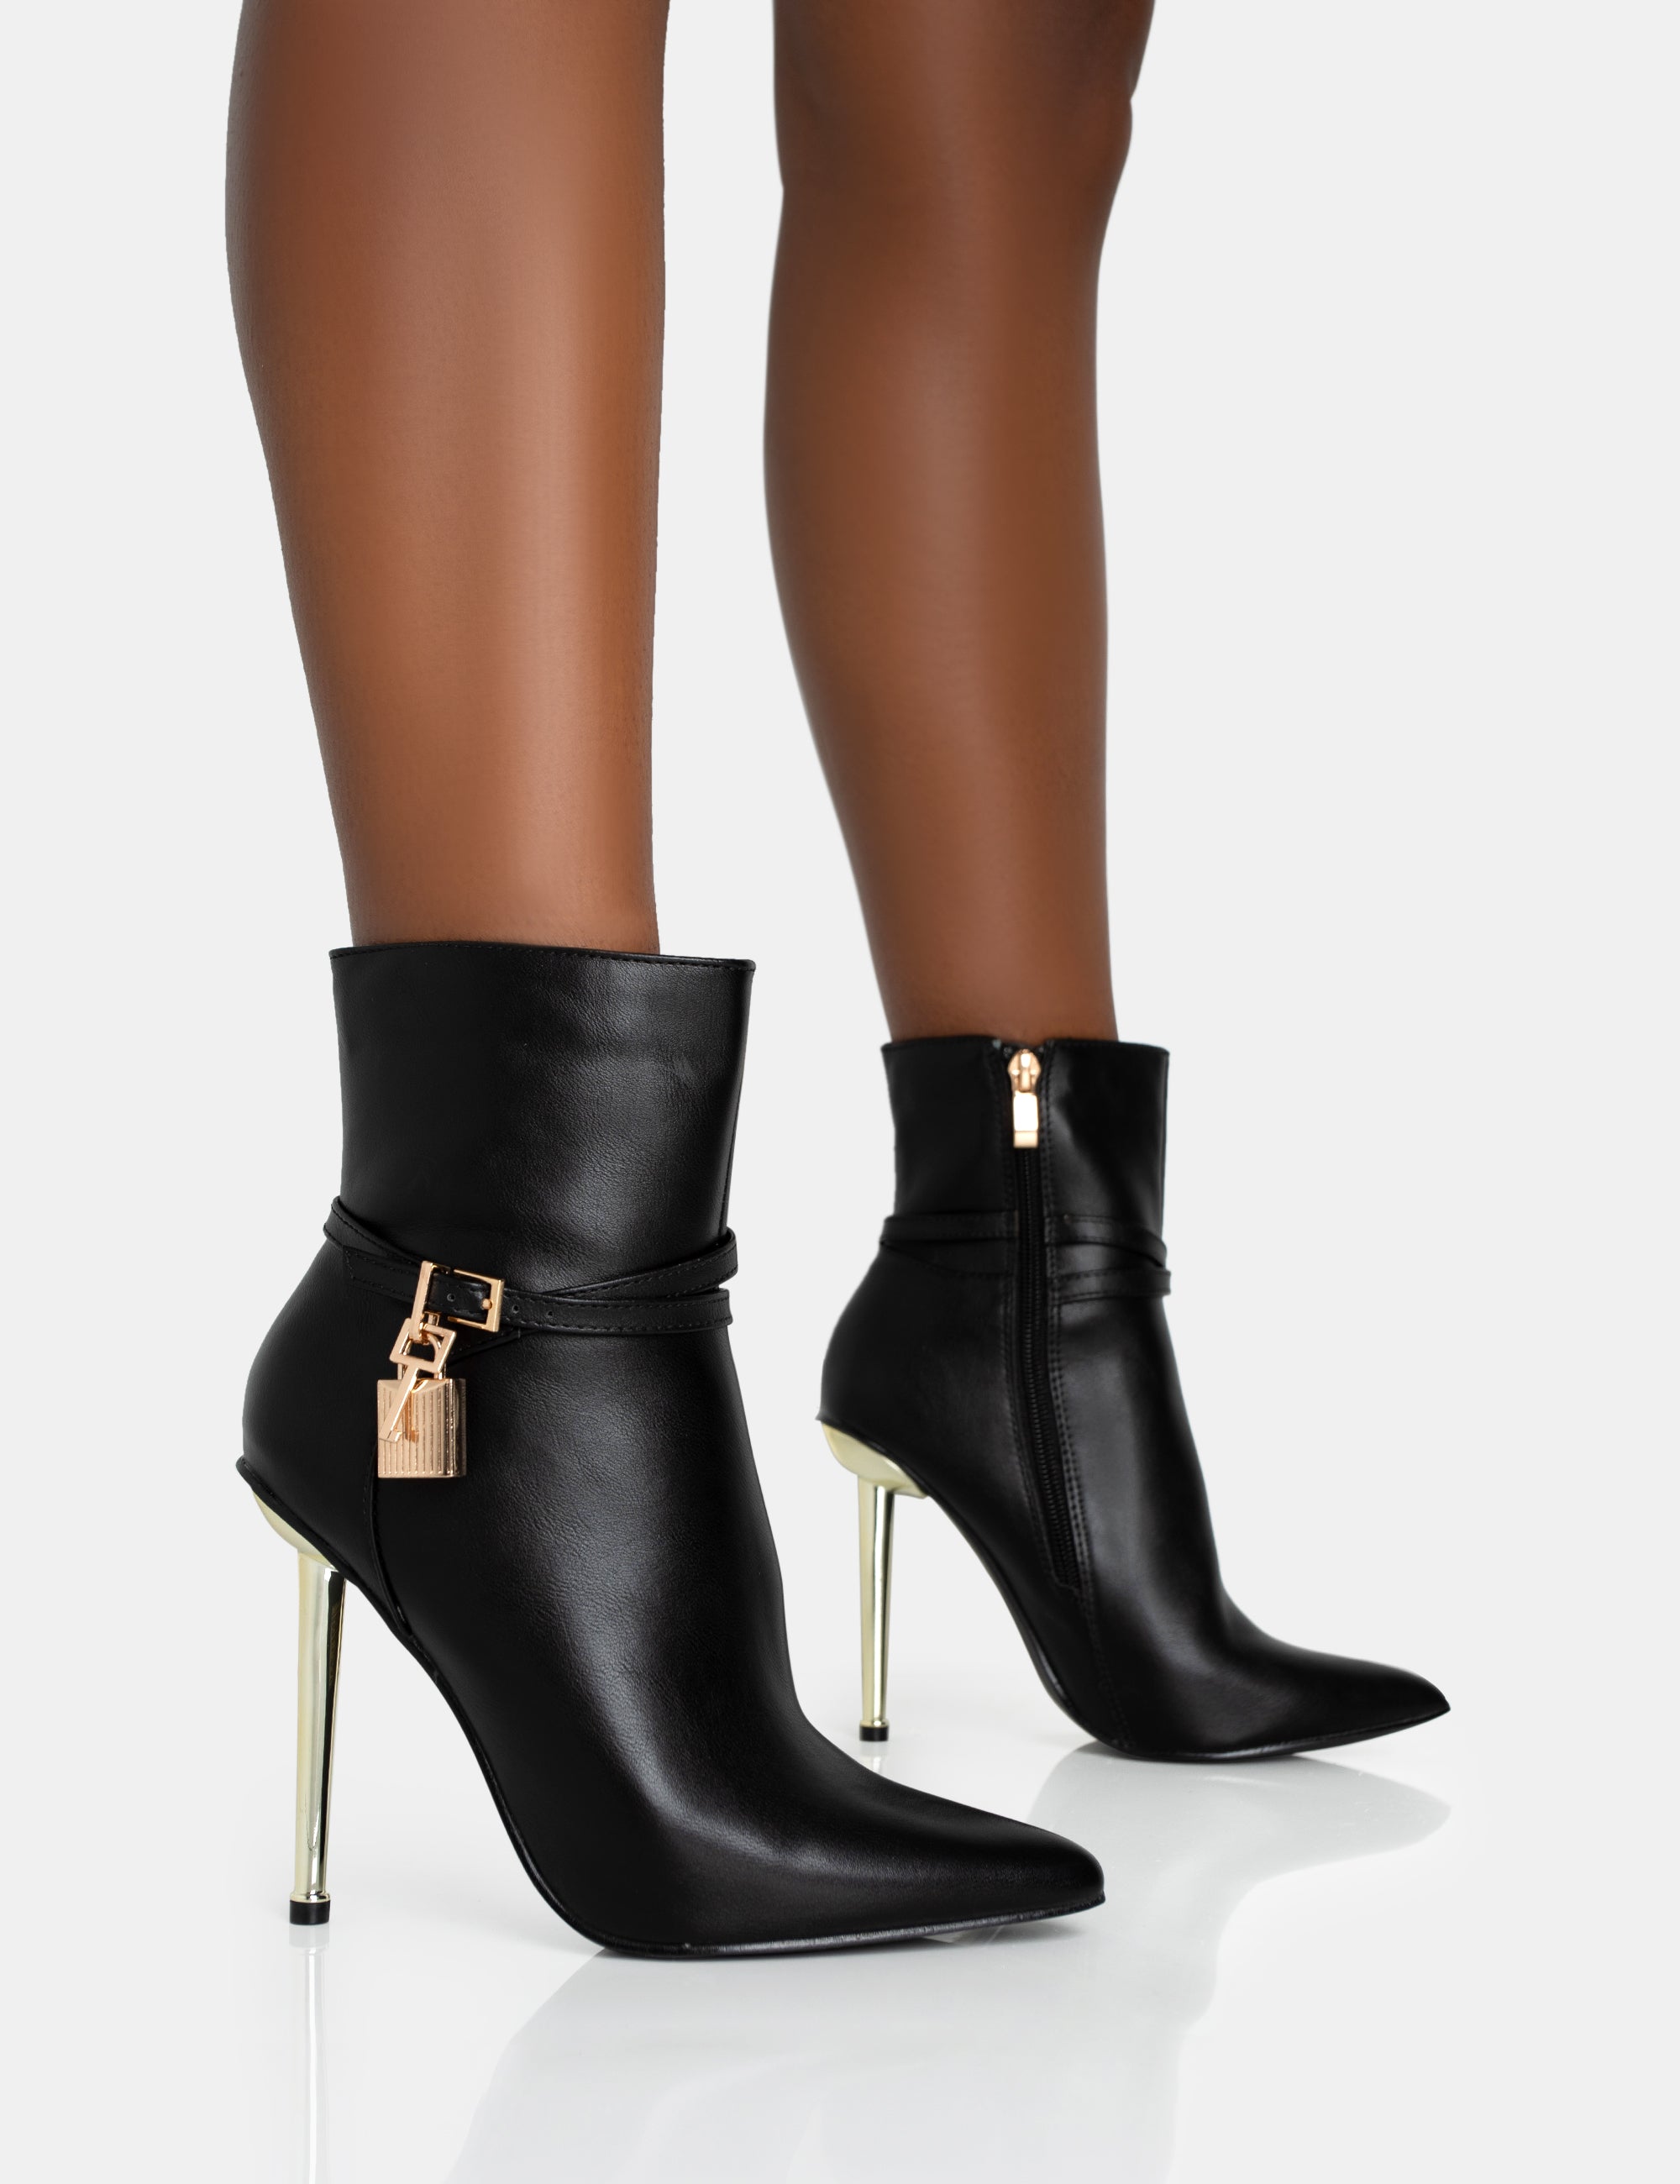 Black heeled ankle boots: best ankle boots with heels 2022